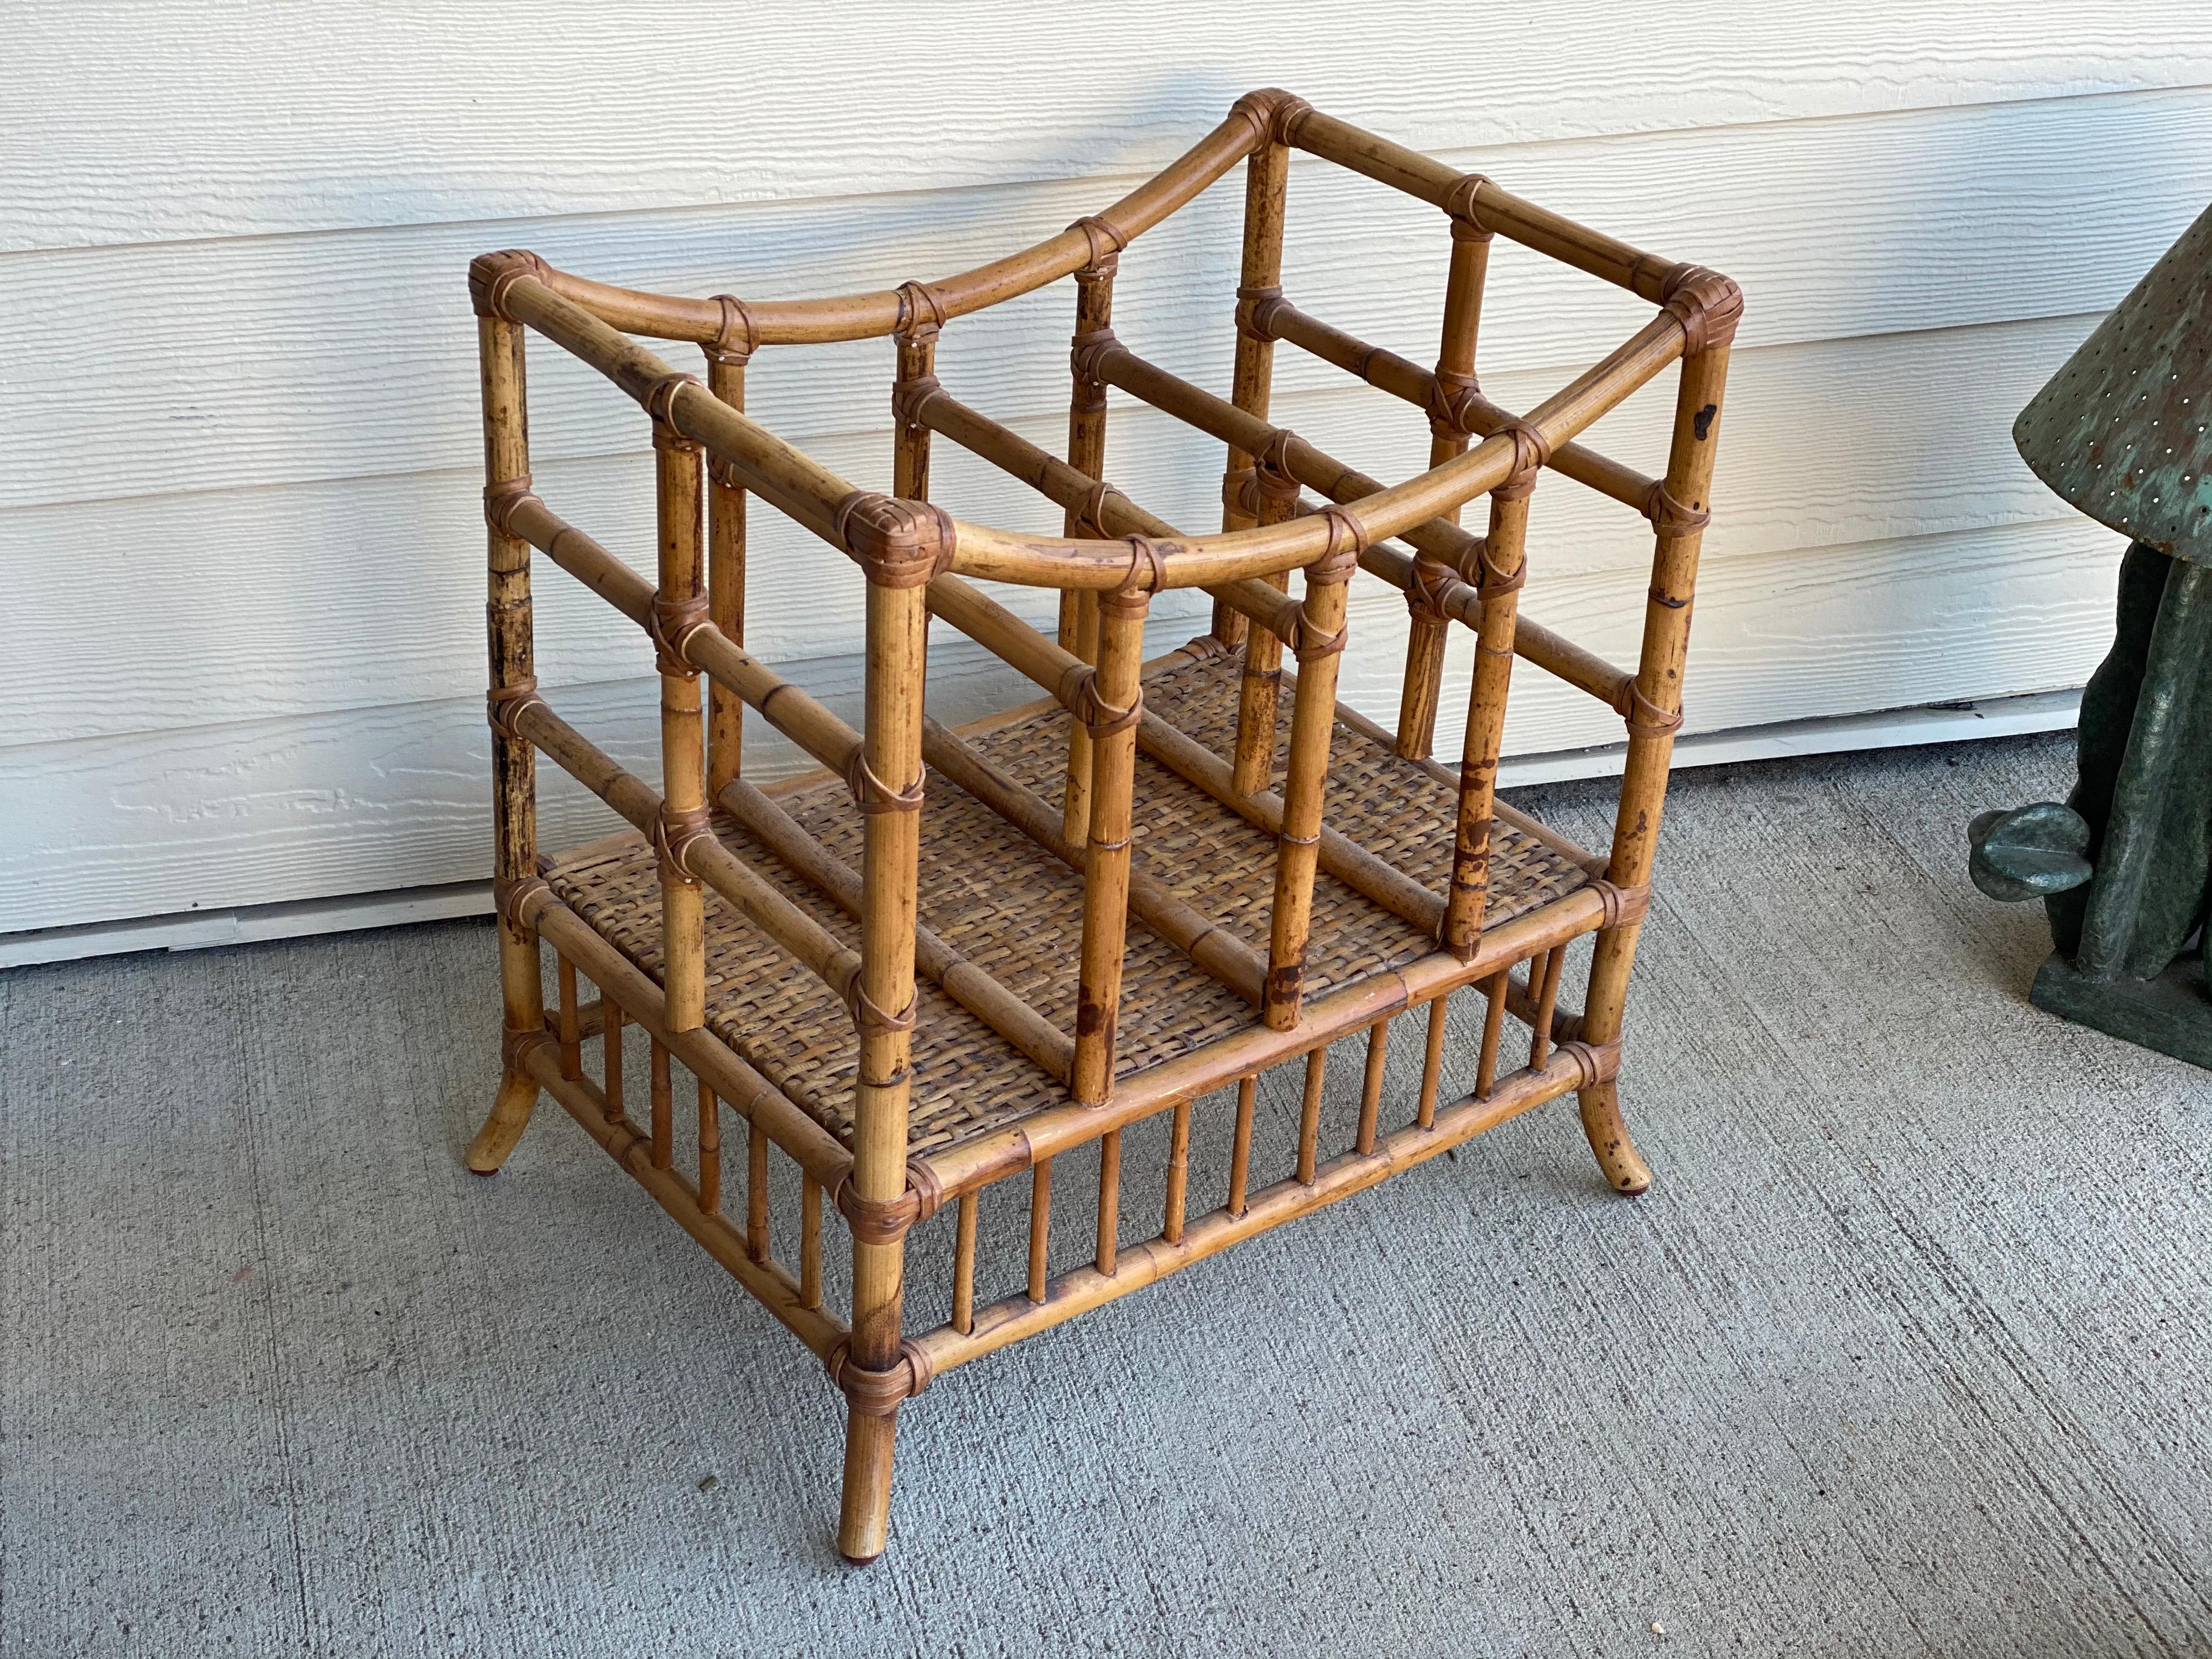 Vintage bamboo magazine rack stand.
Four areas of storage. Bamboo and weaving in good condition
Measures: 20